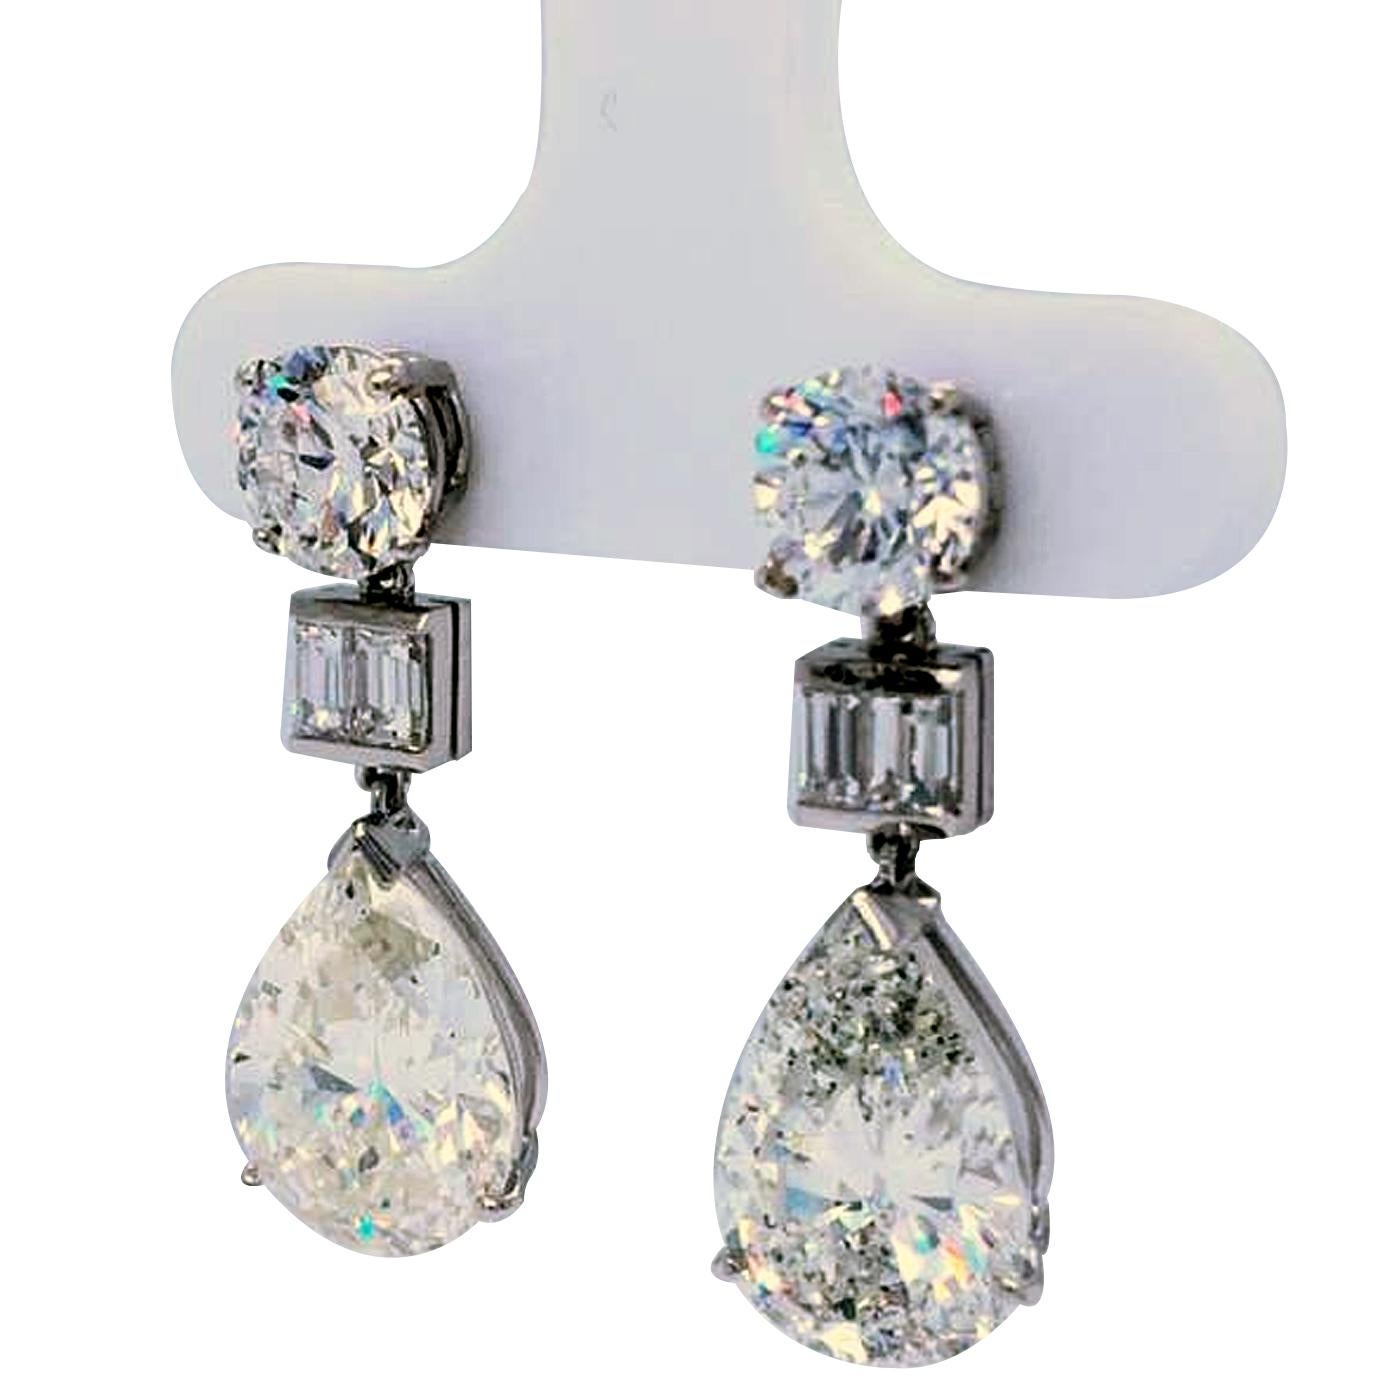 Details:
10.70Ct. Diamond Drop Earrings Mounted with a Pear Diamond 4.01 Ct. GIA #5211688866 J Color I1 Clarity Along with a Round  1.09 Ct. Diamond F - Color, VS1 Clarity GIA #6213945348 And Diamond 4.00 Ct. GIA #2211688860 K Color I1  Clarity